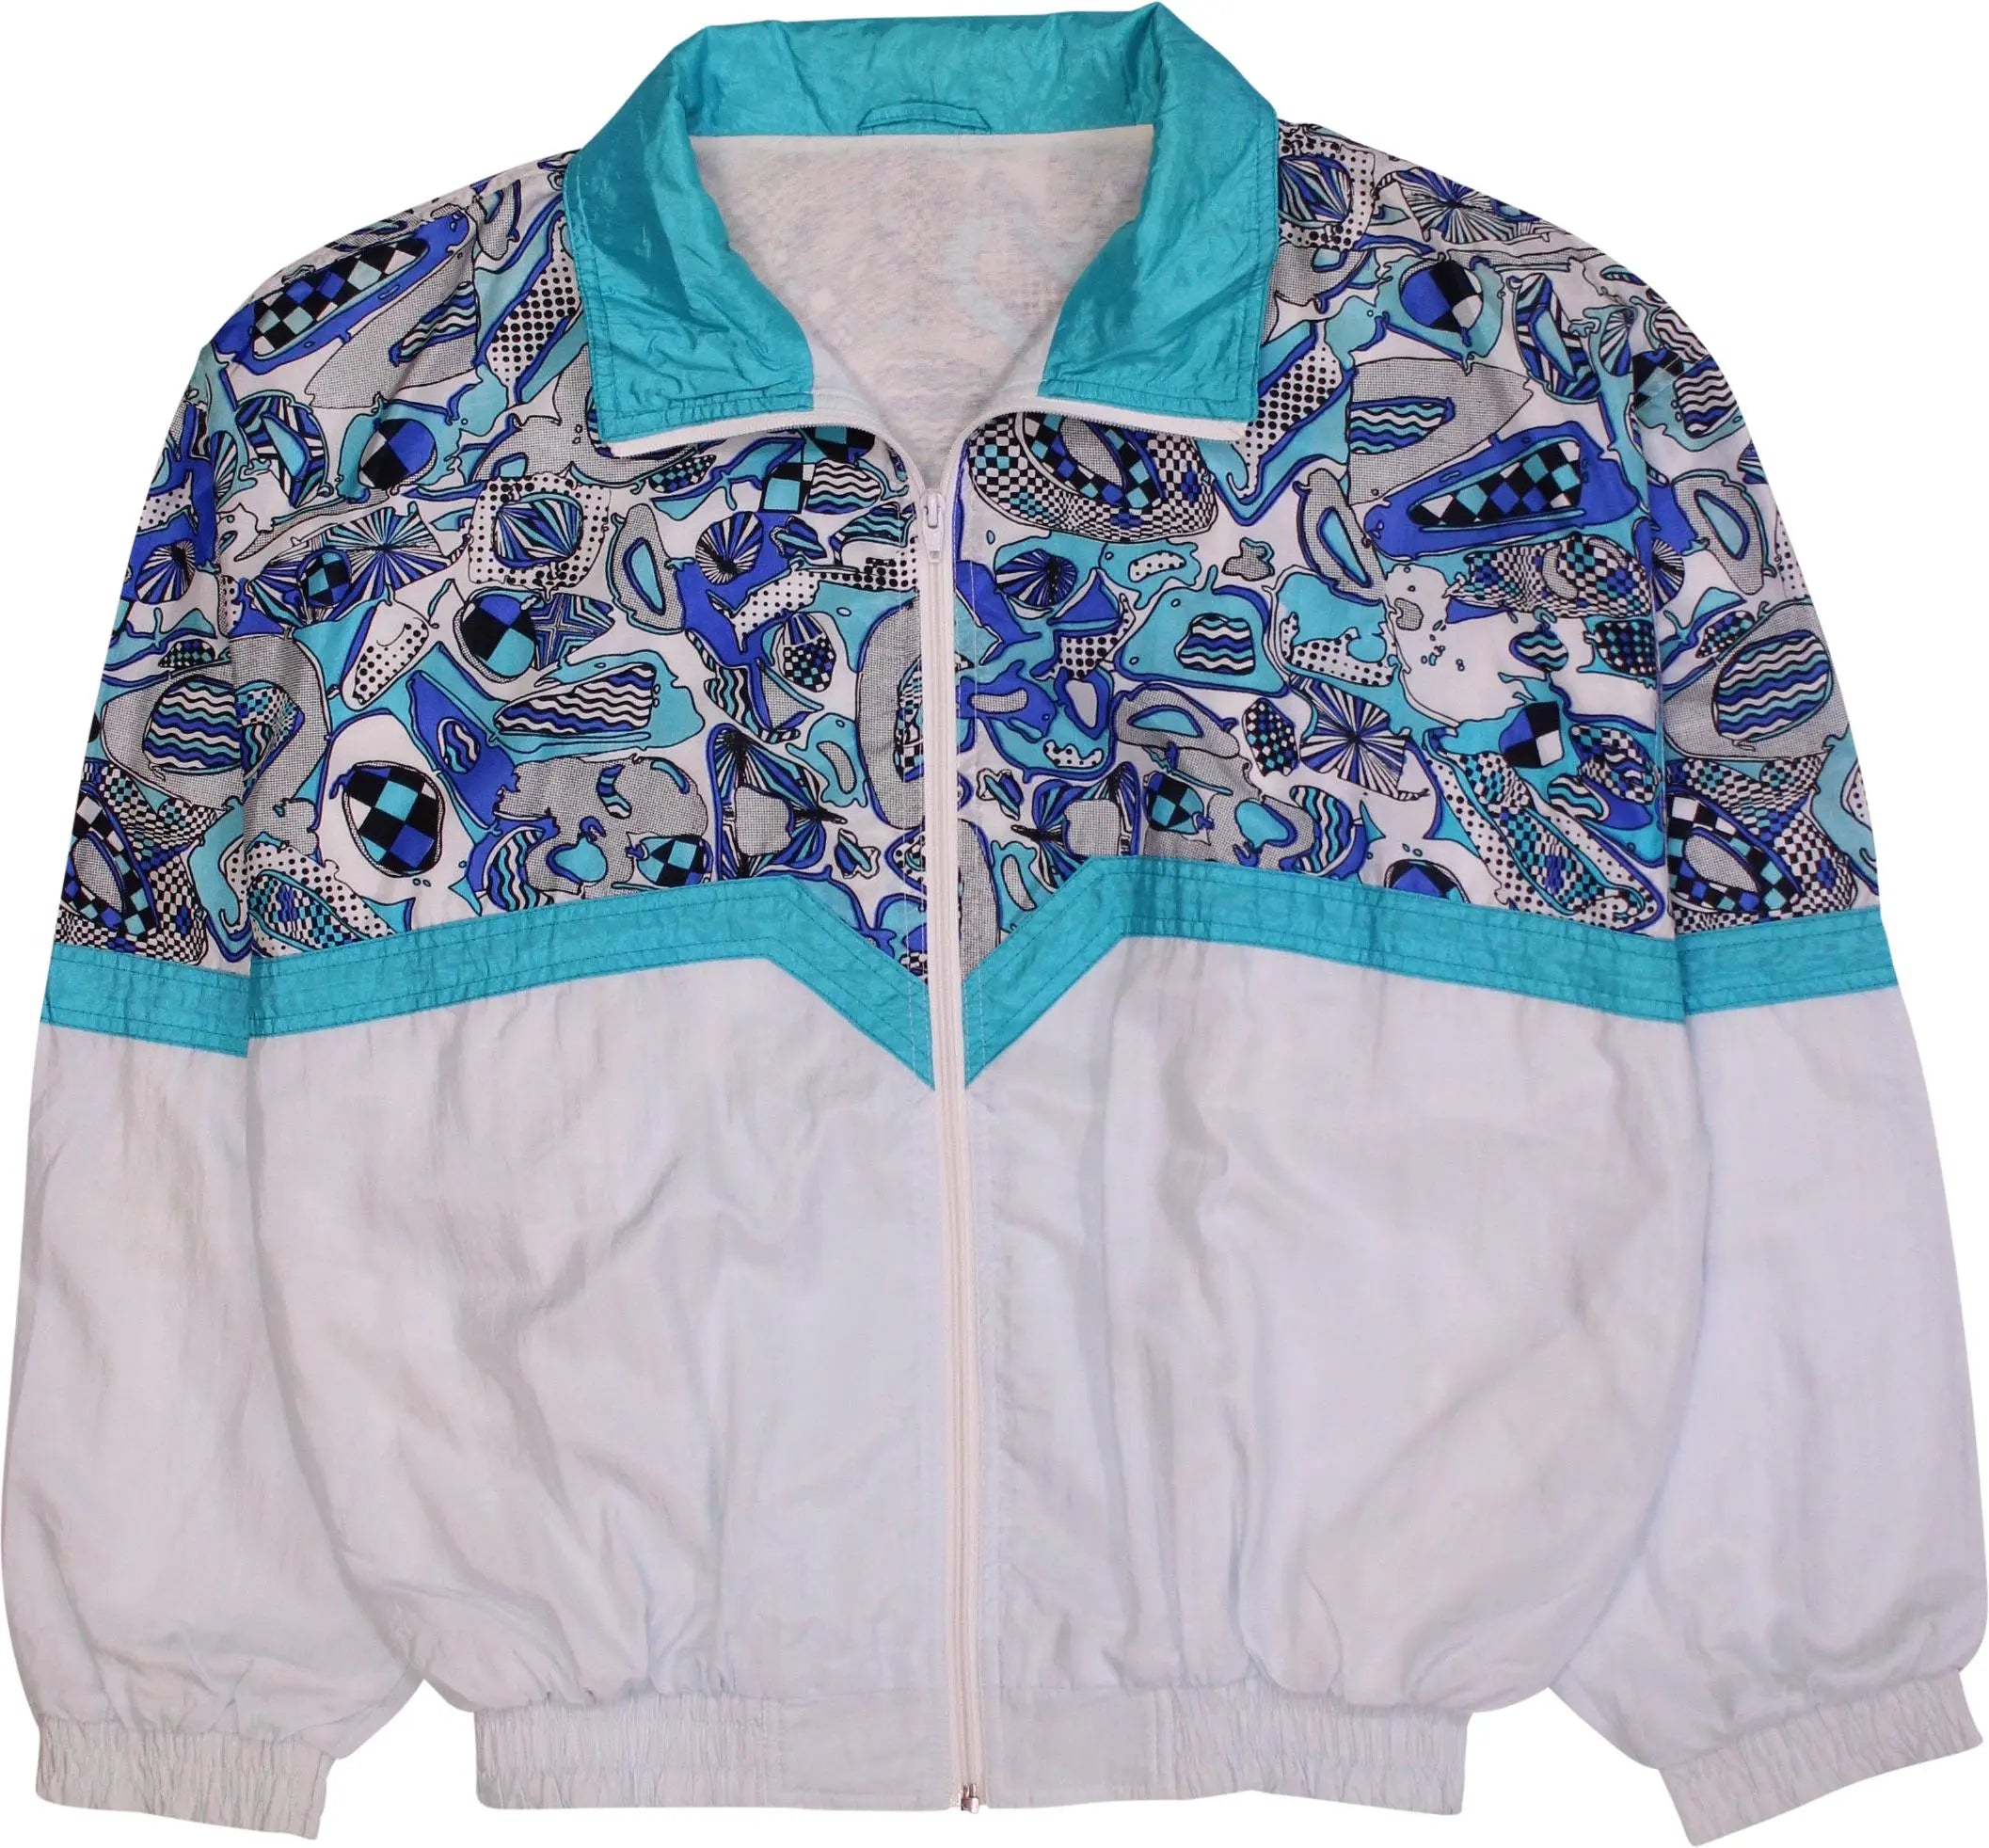 Unknown - 80s/90s Dolphin Windbreaker- ThriftTale.com - Vintage and second handclothing